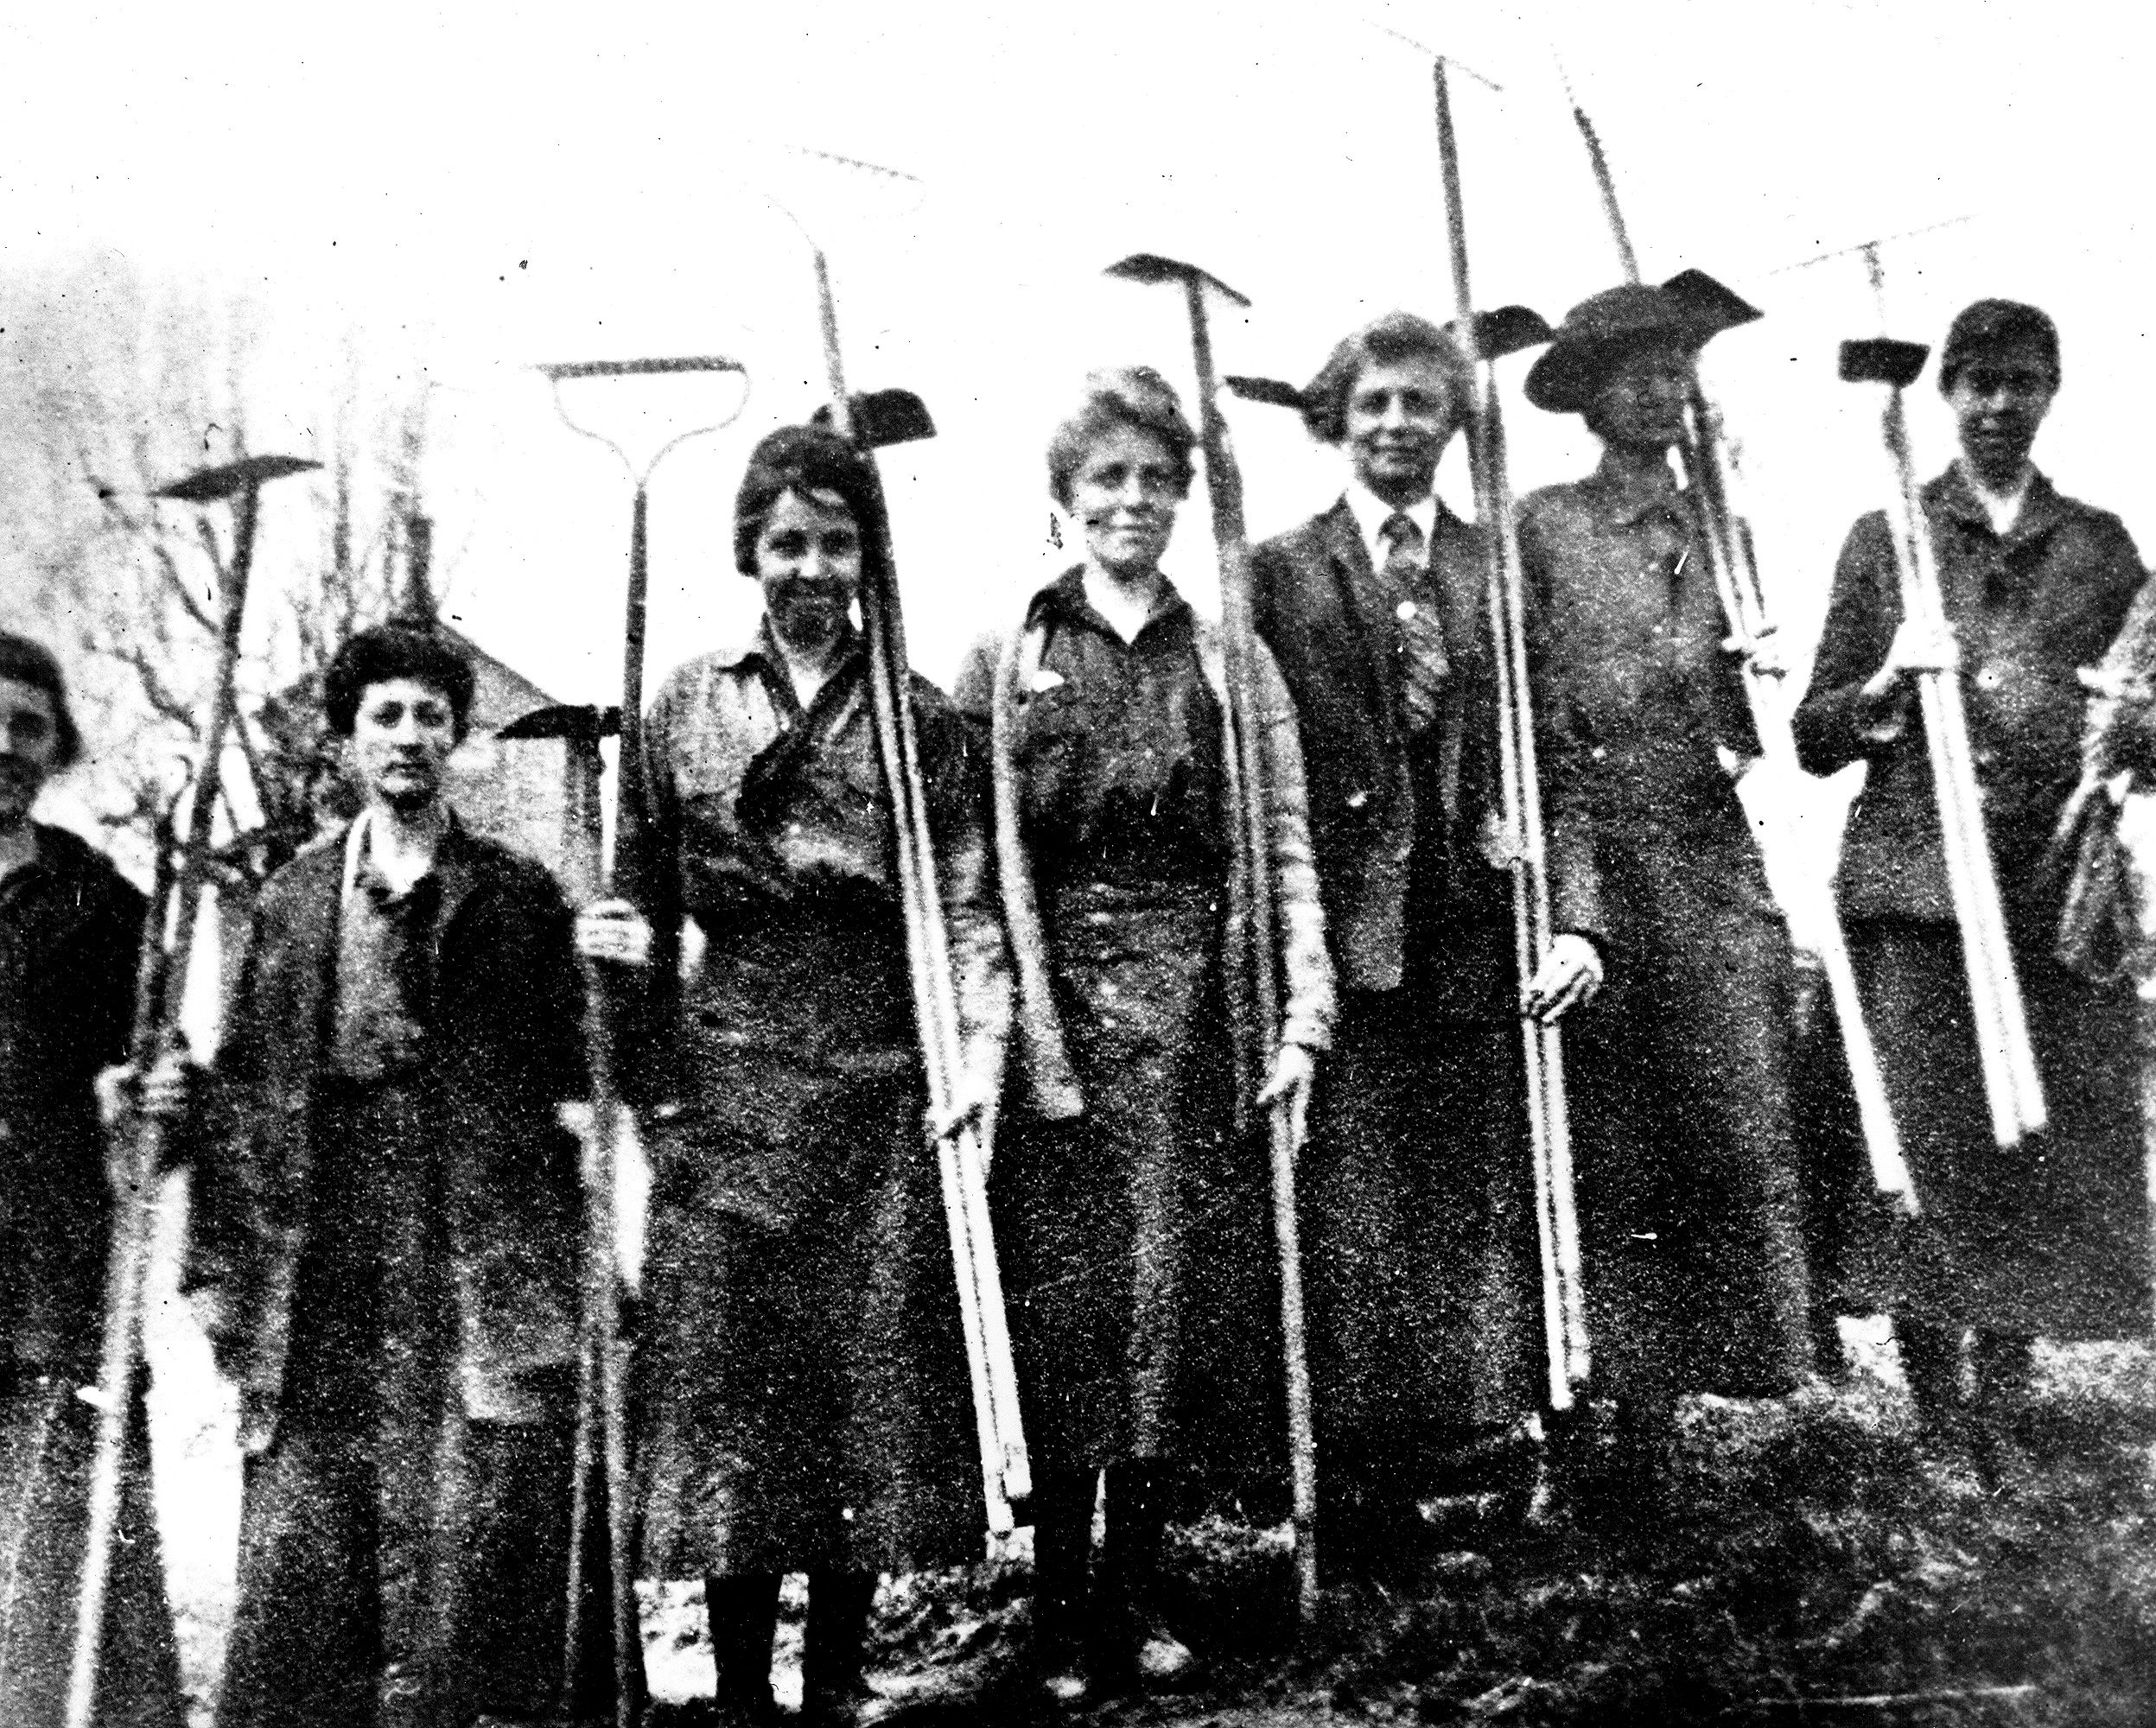  Image of women in the field of horticulture in the time period of World War I.